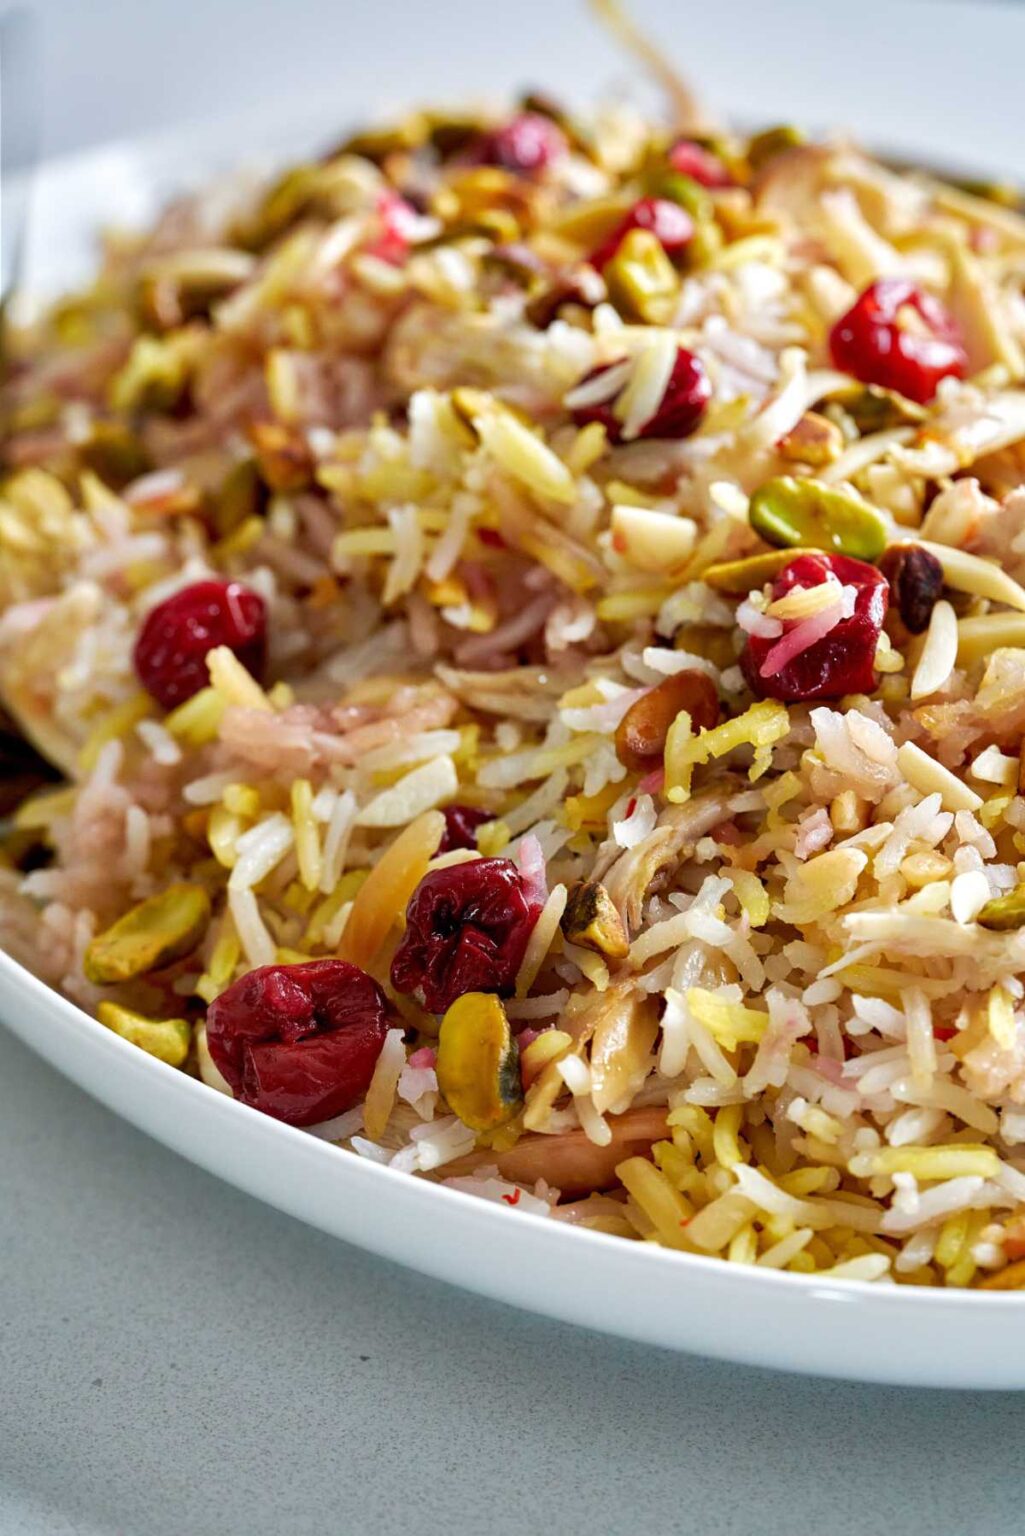 Albaloo Polo, Sour Cherry Rice with Chicken - Proportional Plate